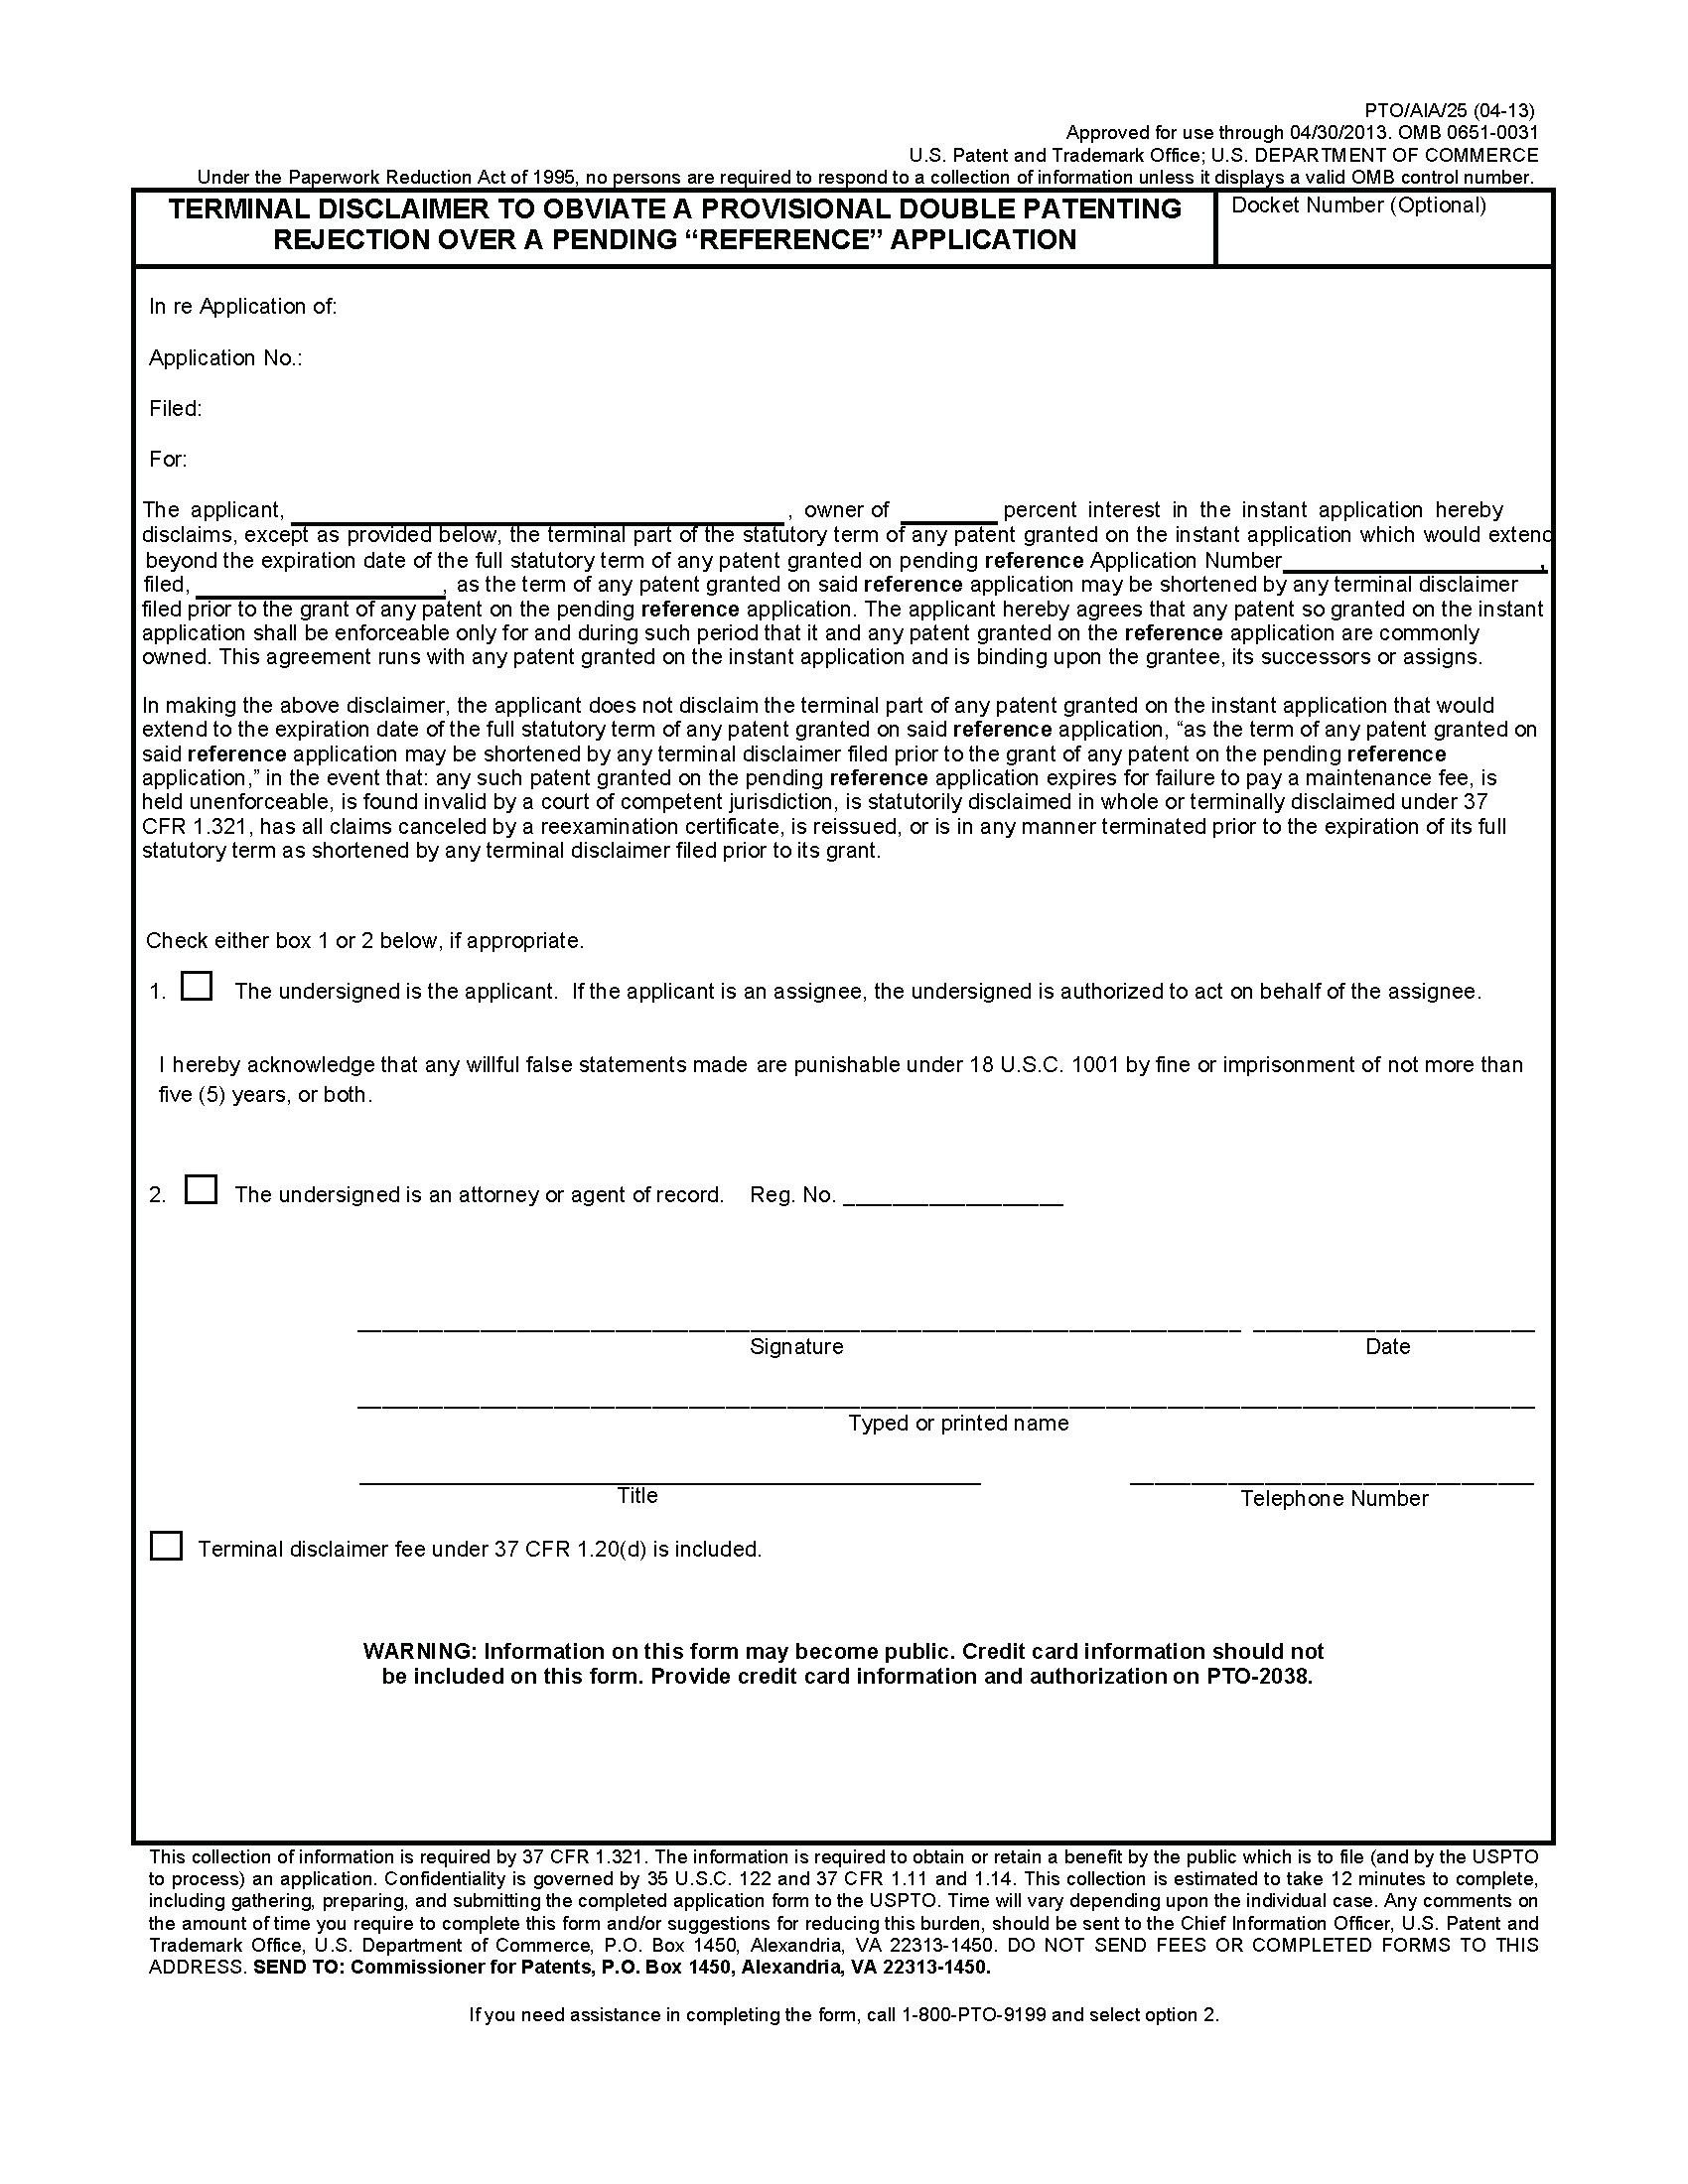 Provisional Patent Application Template Provisional Patent Template